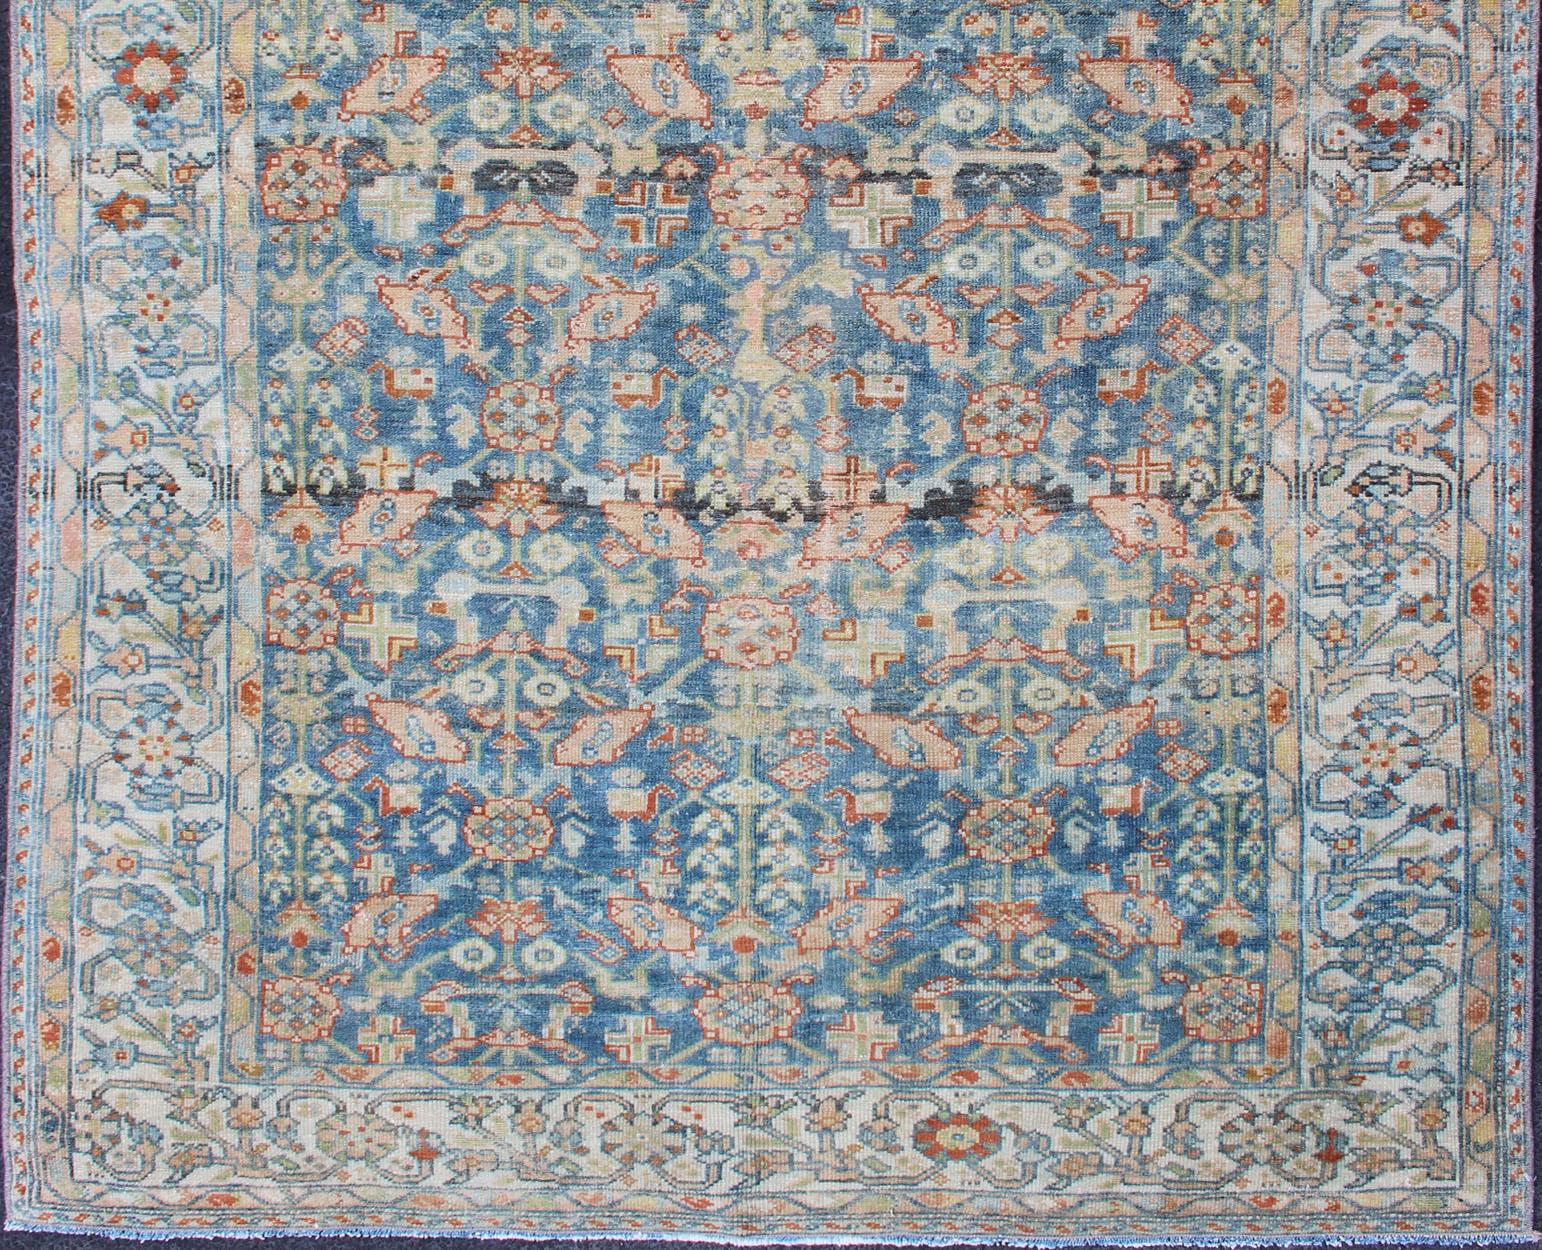 Hand-Knotted Persian Antique Malayer Rug with All-Over Design in Various Blue, Ivory & Red